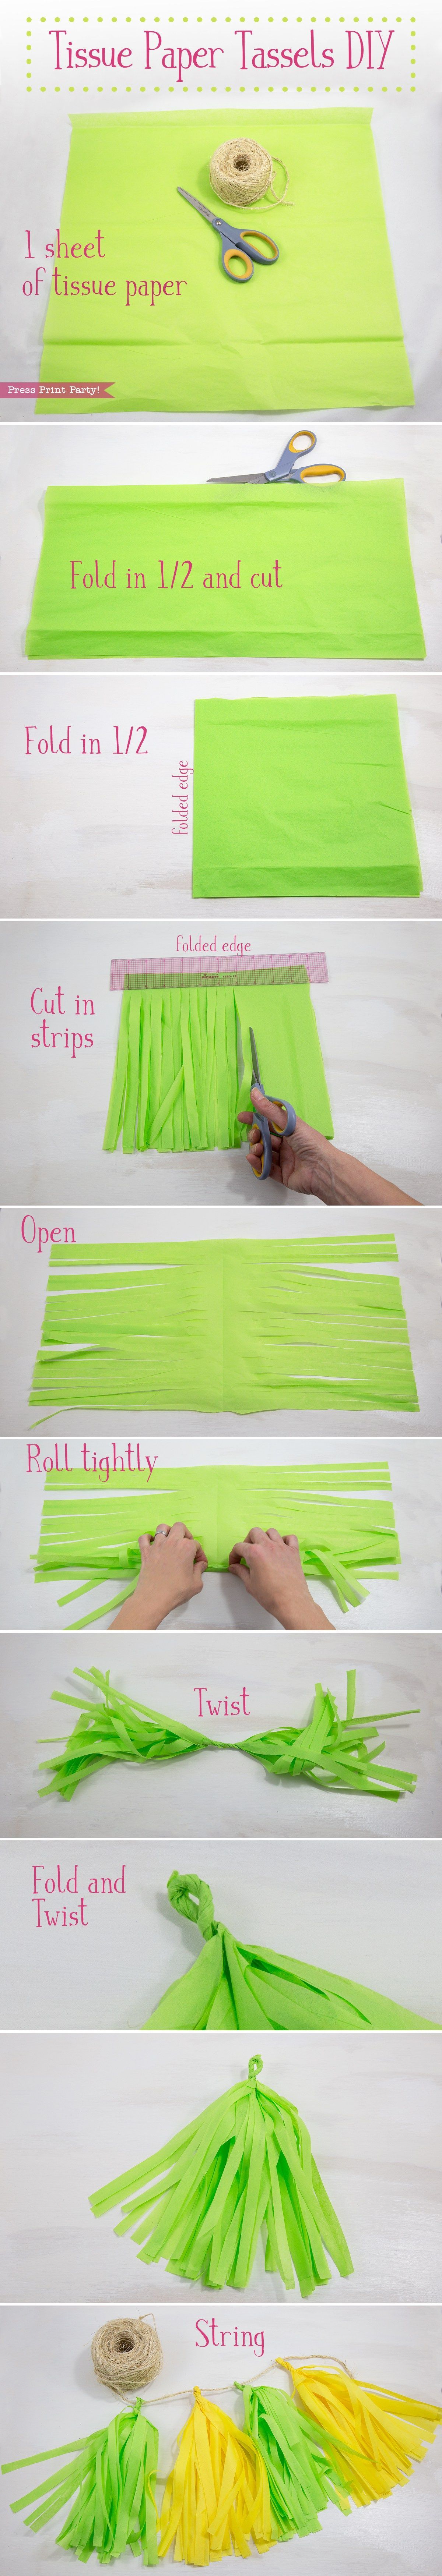 Learn how to make tissue paper tassels and garlands in any color to match your party theme. They’re cheap, super festive, and easy